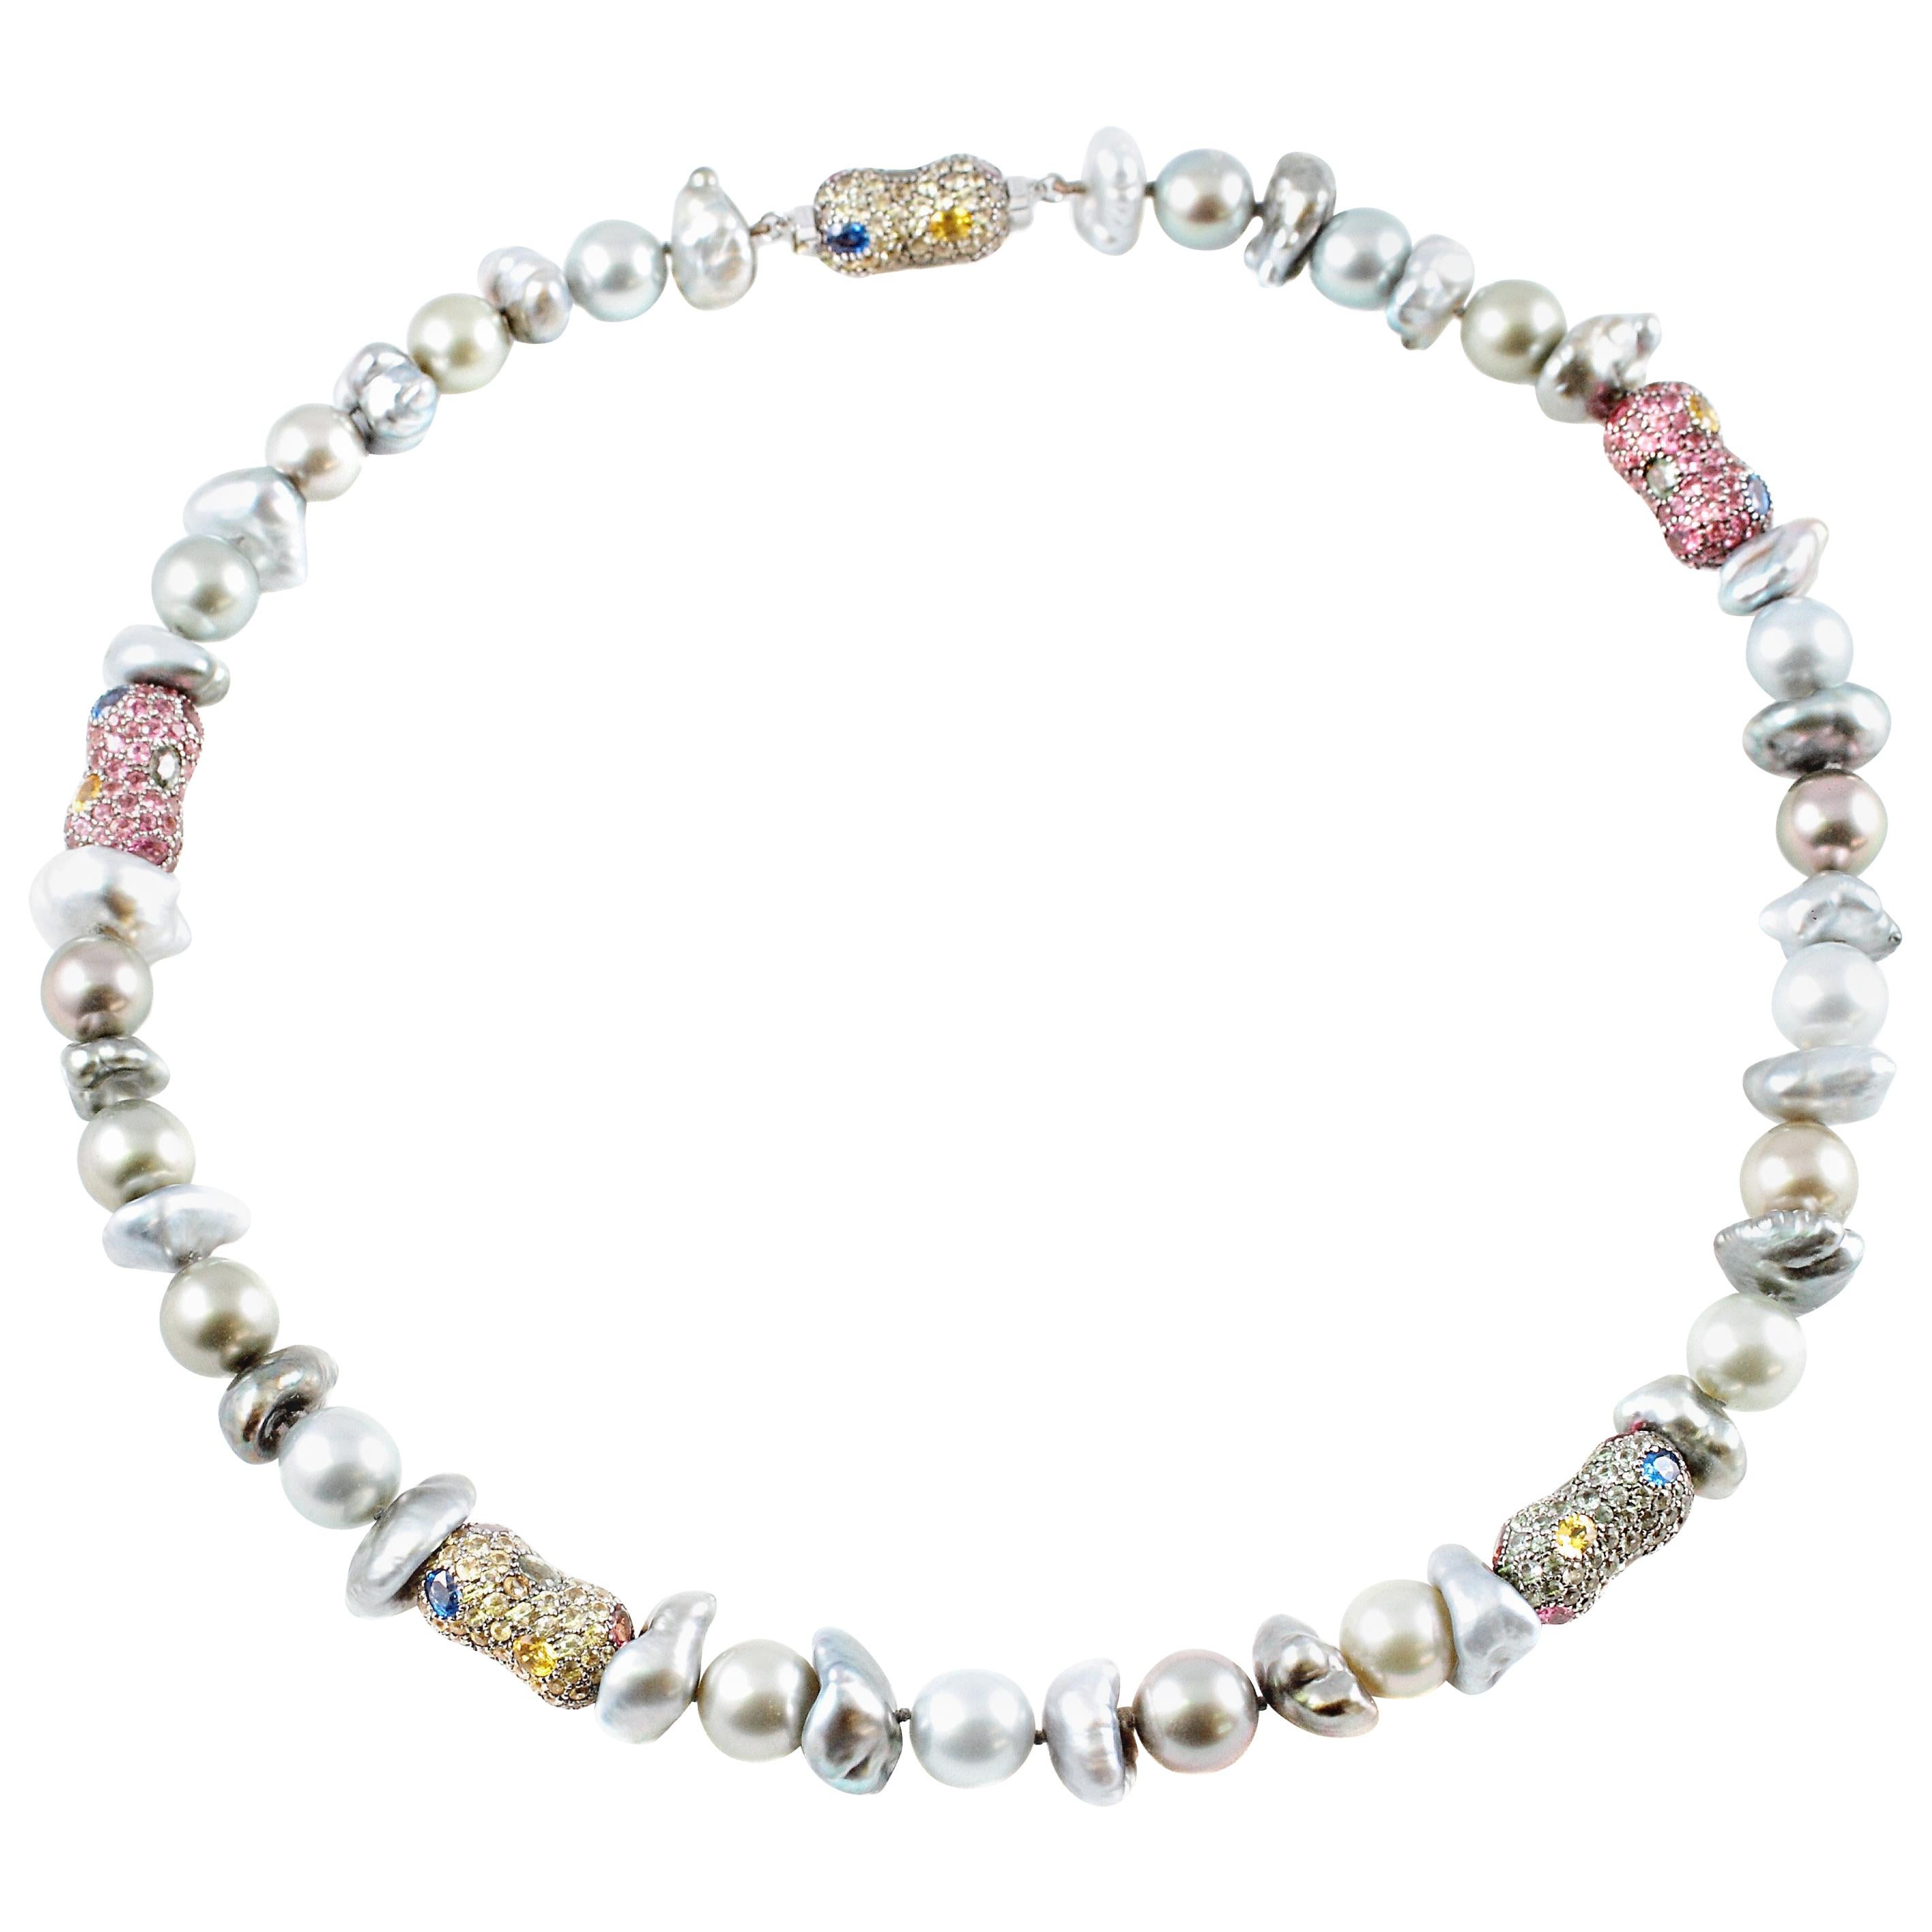 Margot McKinney "Tribal Chic Collection" Necklace Pearls Sapphires Tourmalines For Sale